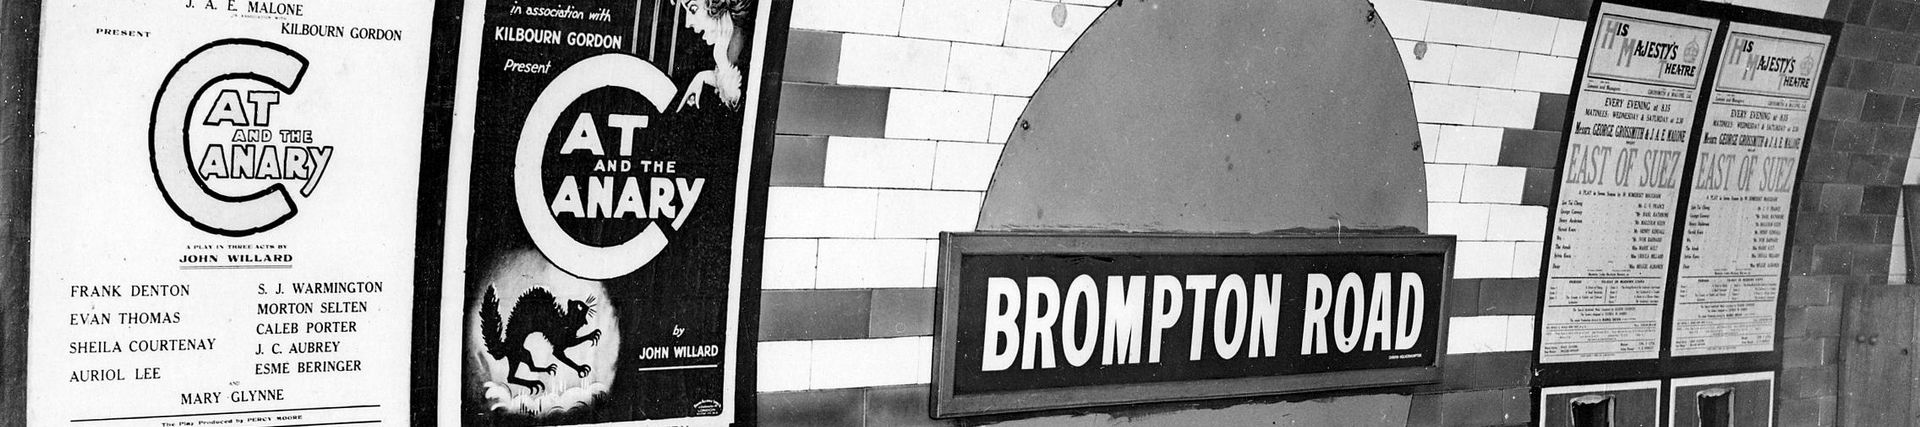 Platform view at Brompton Road station showing station roundel nameplate and advertising by Topical Press, 1923